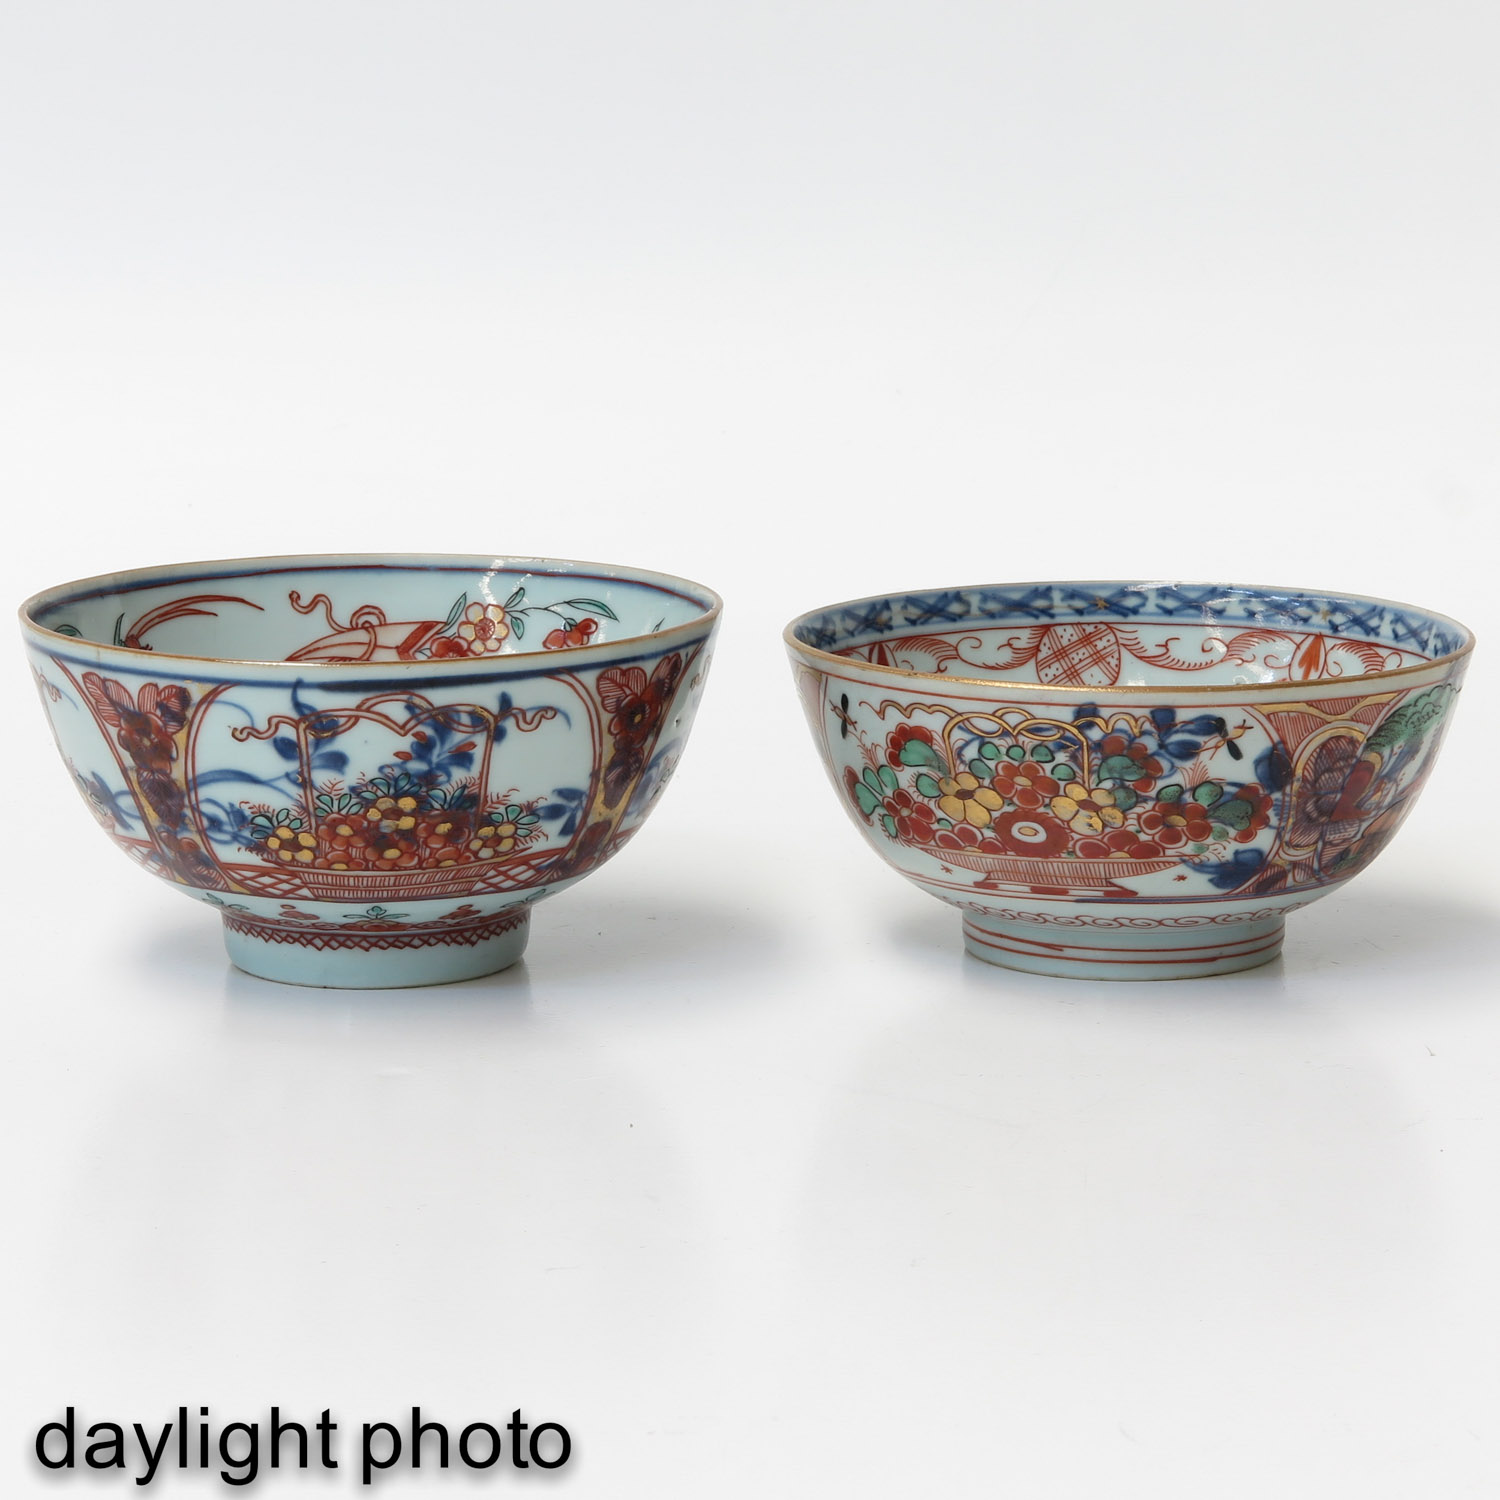 A Series of 4 Bowls - Image 7 of 10